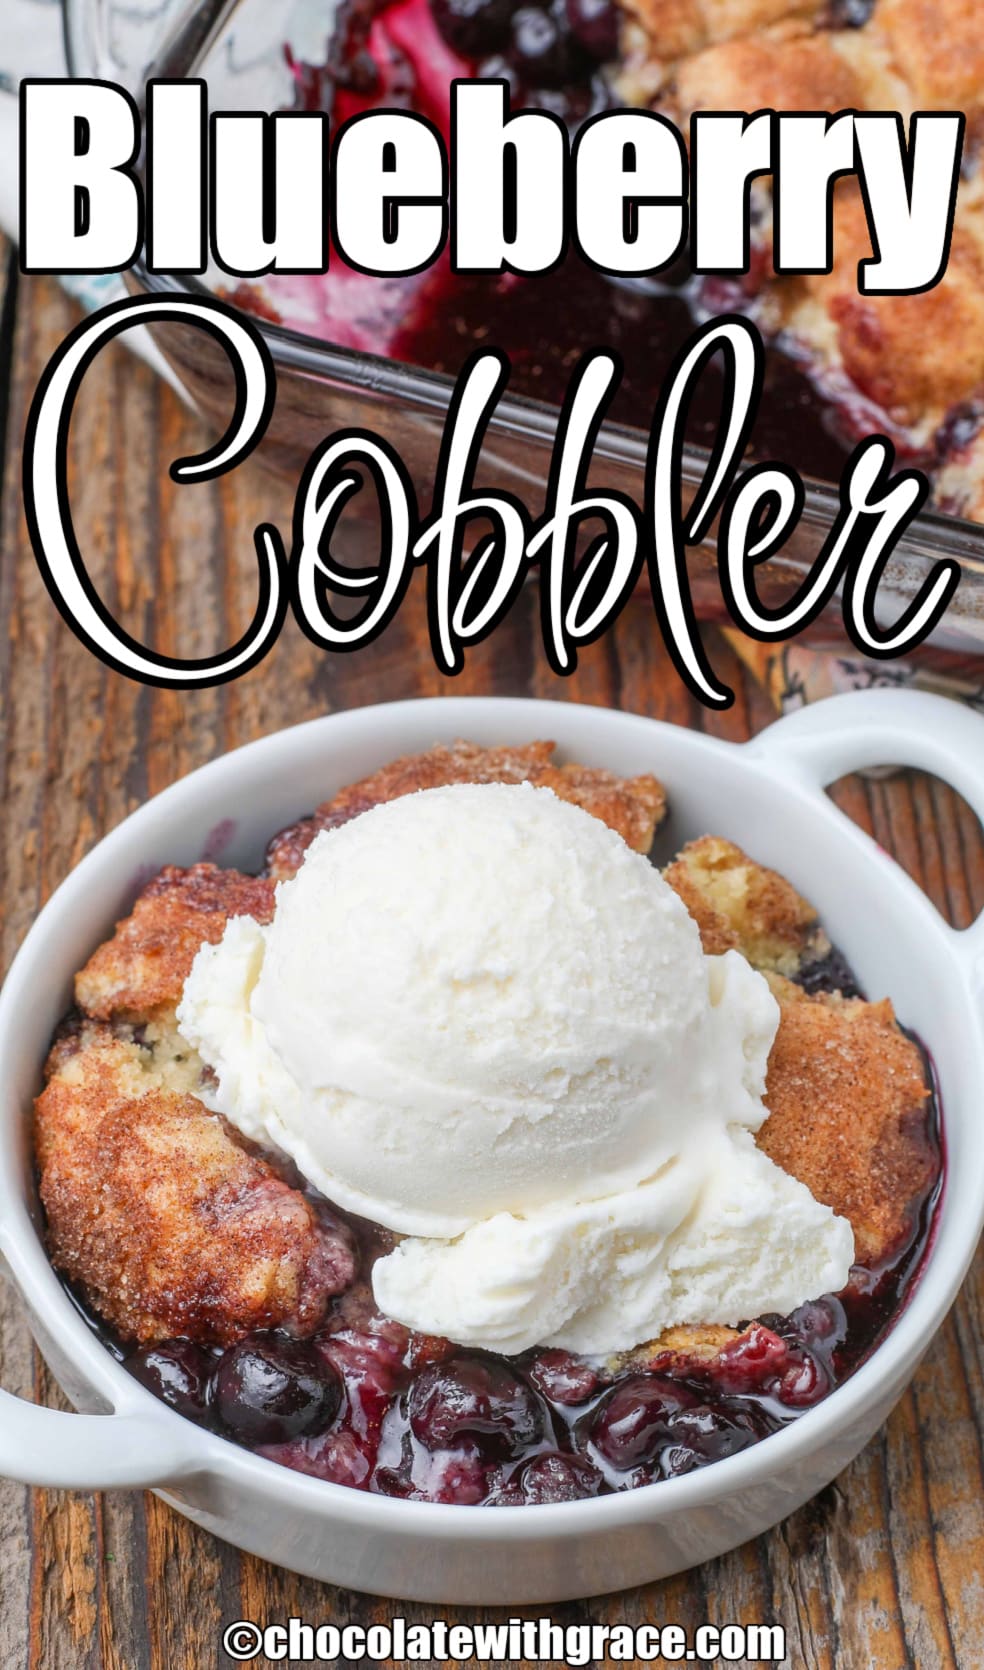 Blueberry Cobbler - Chocolate with Grace